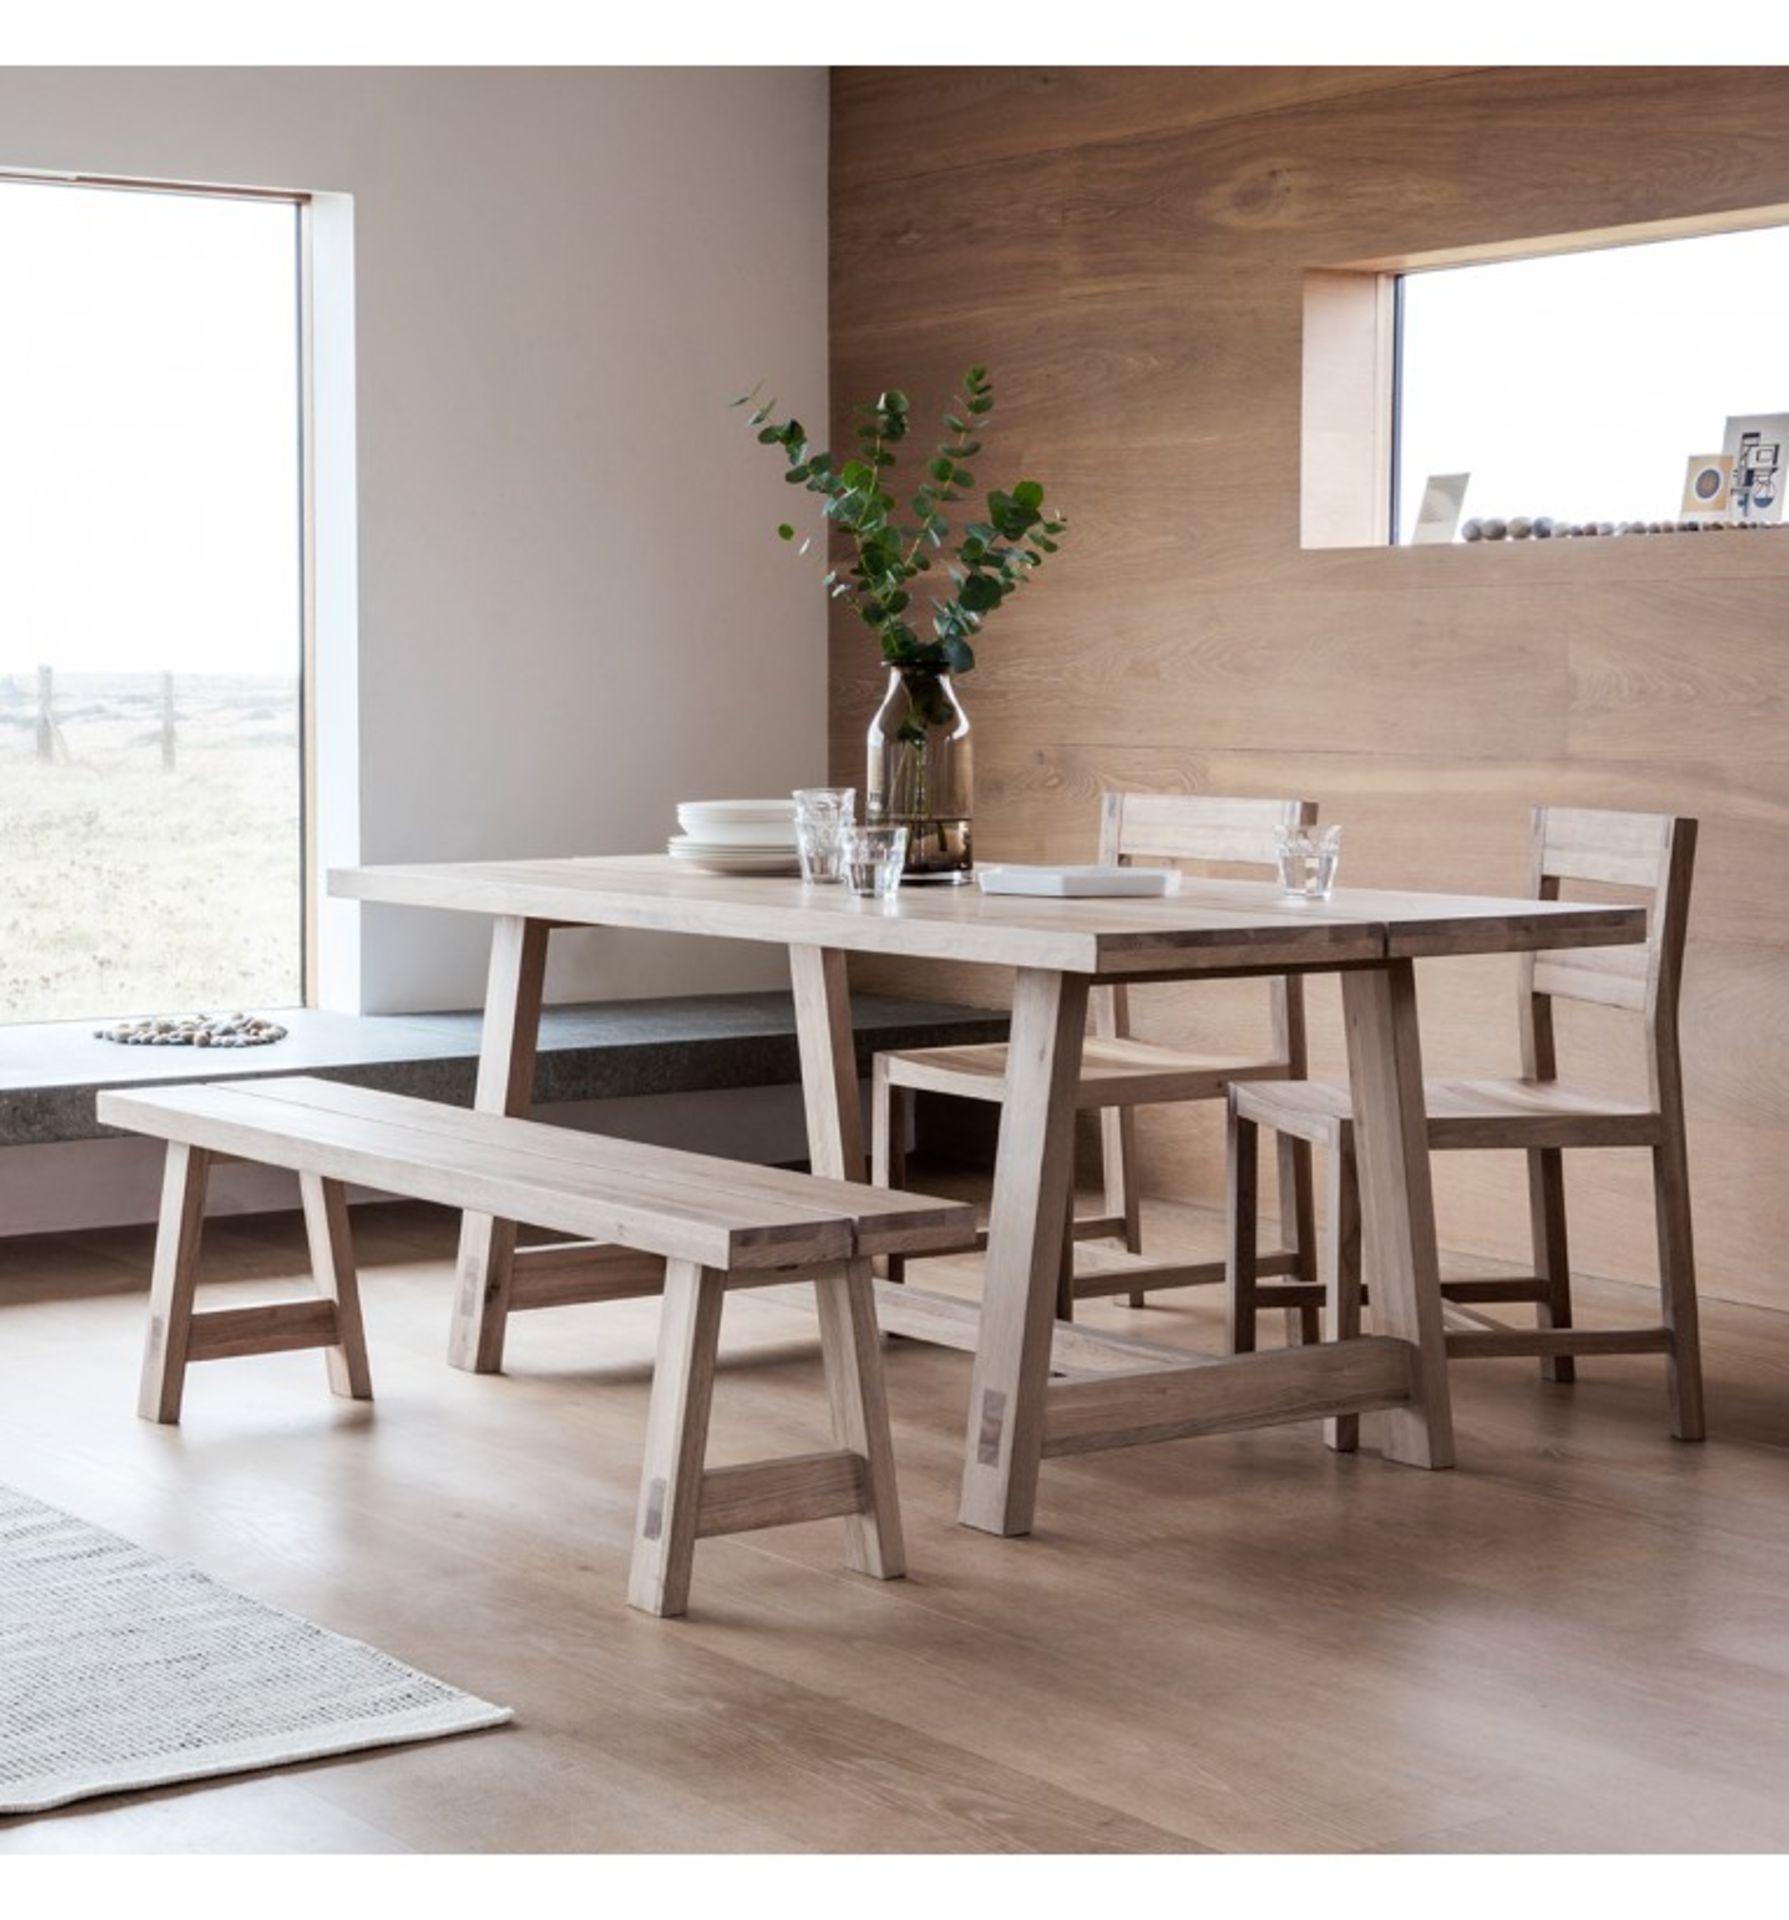 Kielder Dining Table Simple In Design A Truly Solid And Contemporary Style And Is Crafted With